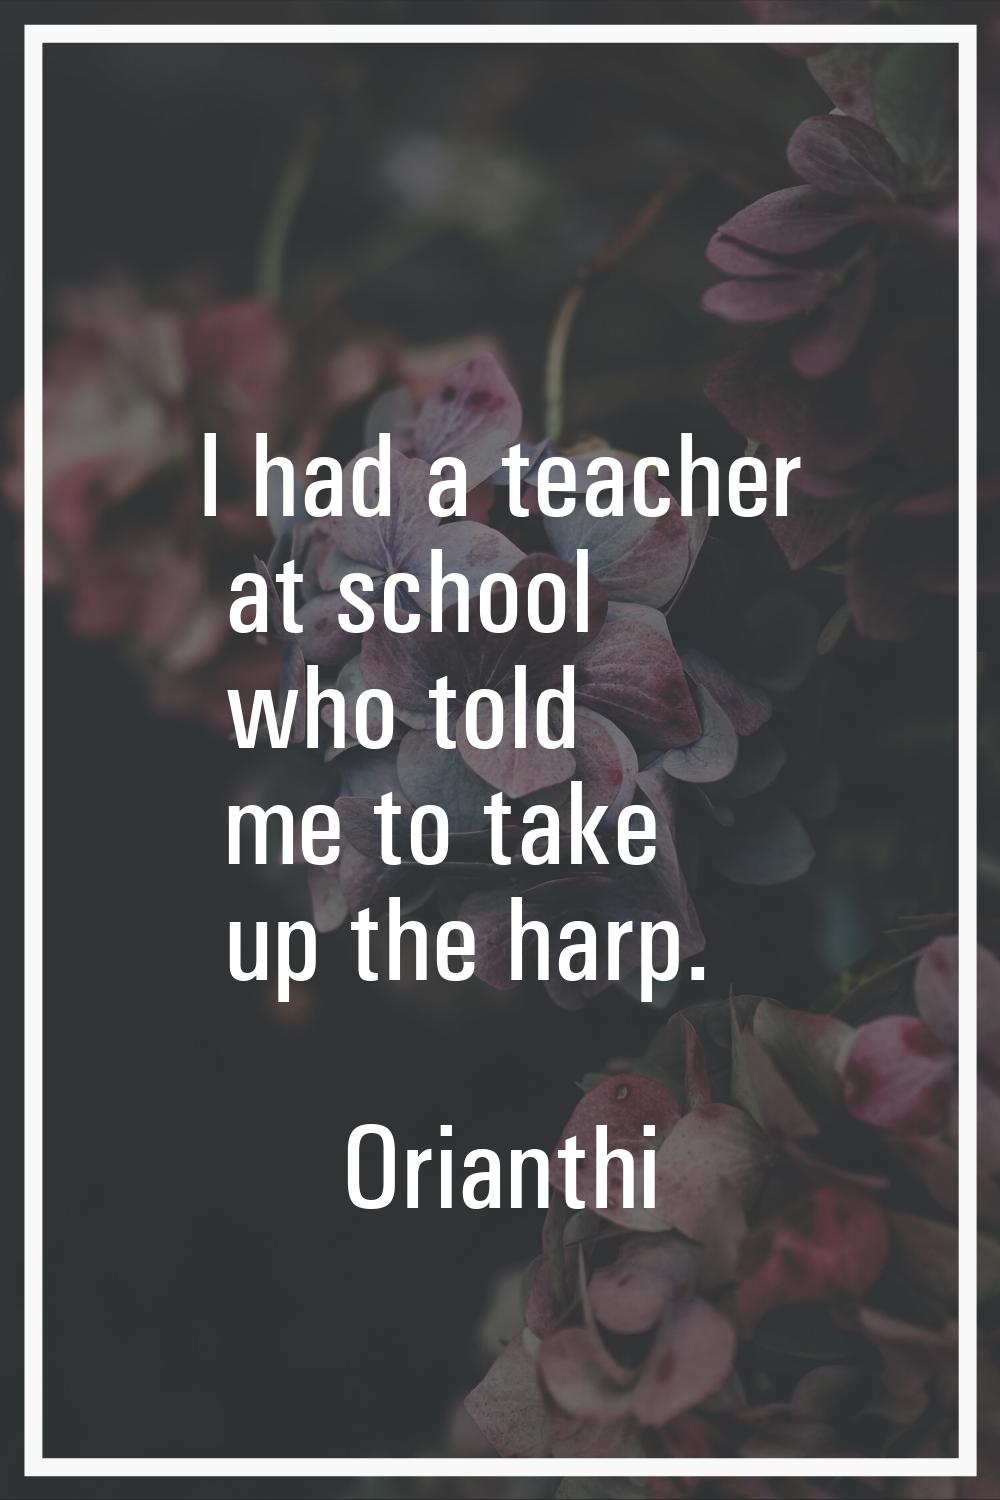 I had a teacher at school who told me to take up the harp.